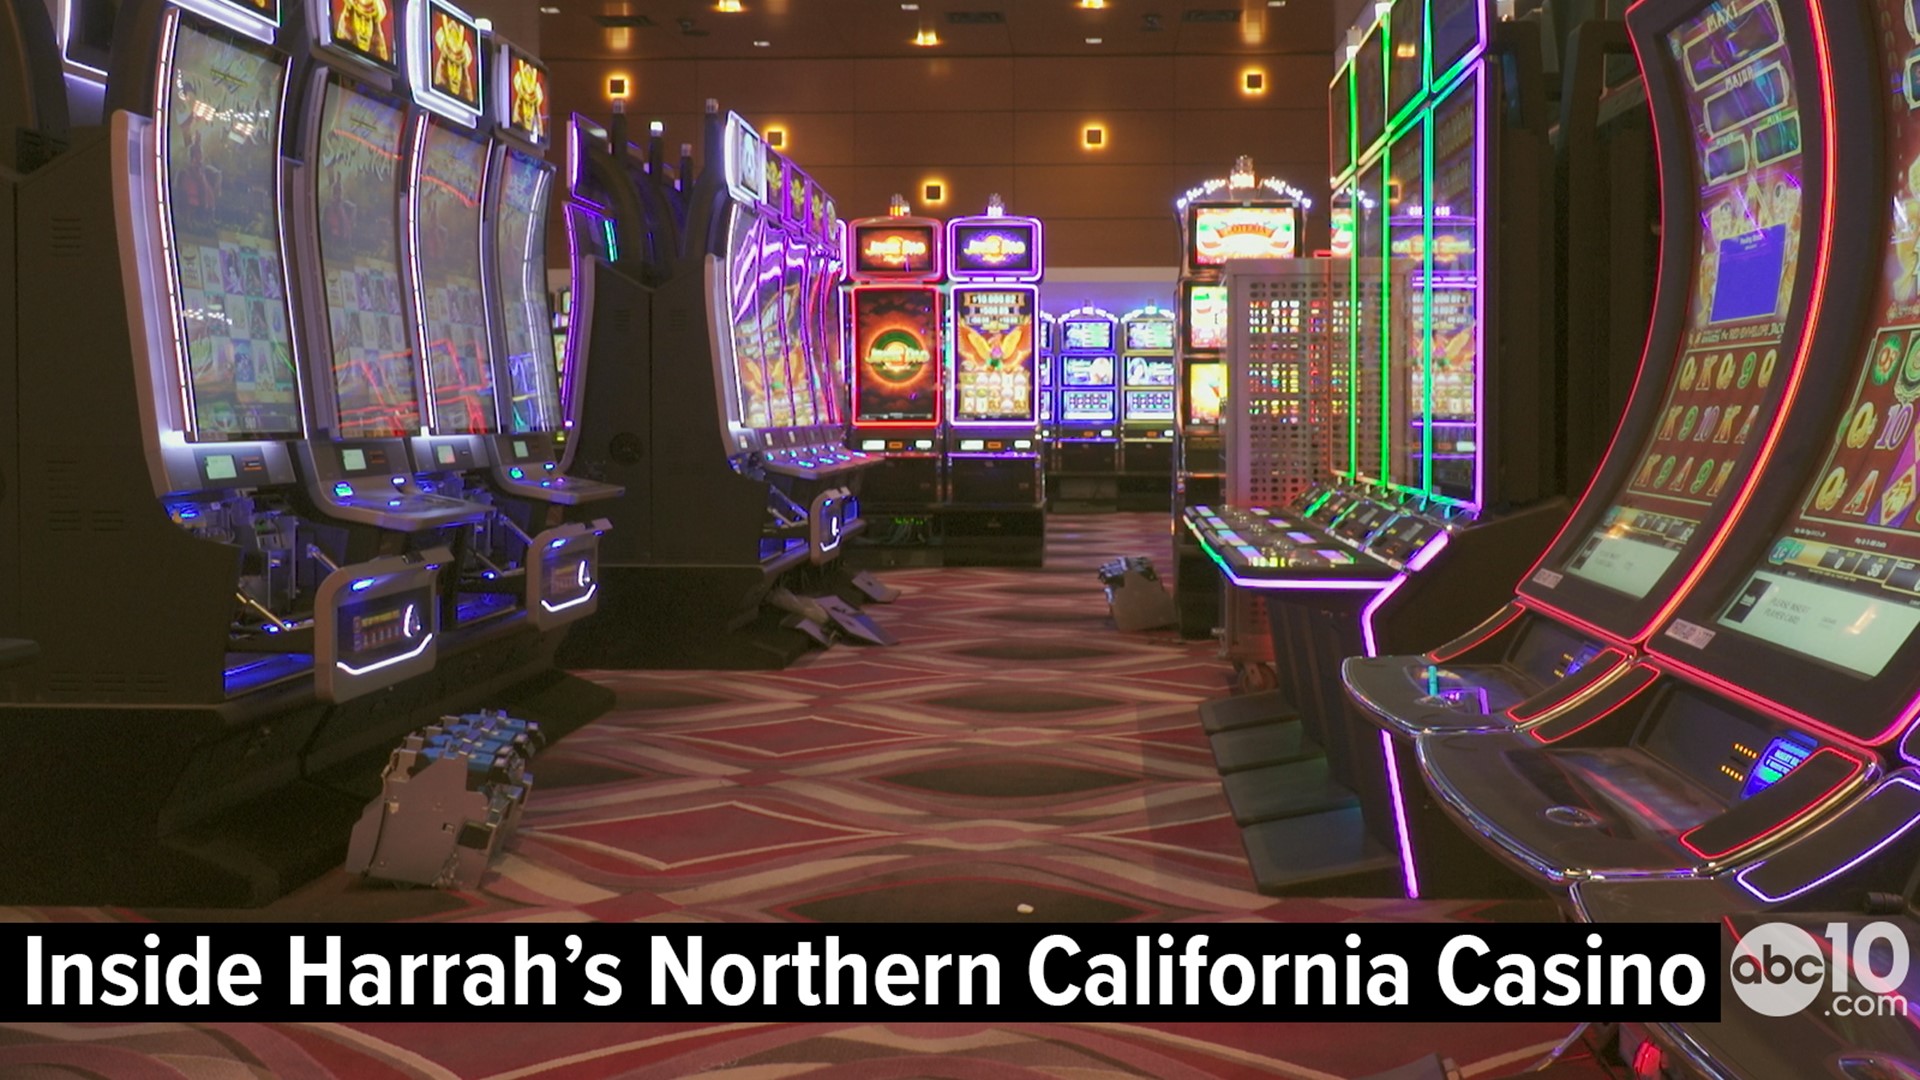 Take a tour of the new Harrah's Northern California Casino in Ione. The casino opens on April 29, 2019. It features 950 slots, 20 table games, a restaurant and a food court. The casino is located in Amador County, about a 45 minute drive from Sacramento and Stockton. Learn more about the new casino and jobs here: http://bit.ly/2IoArax